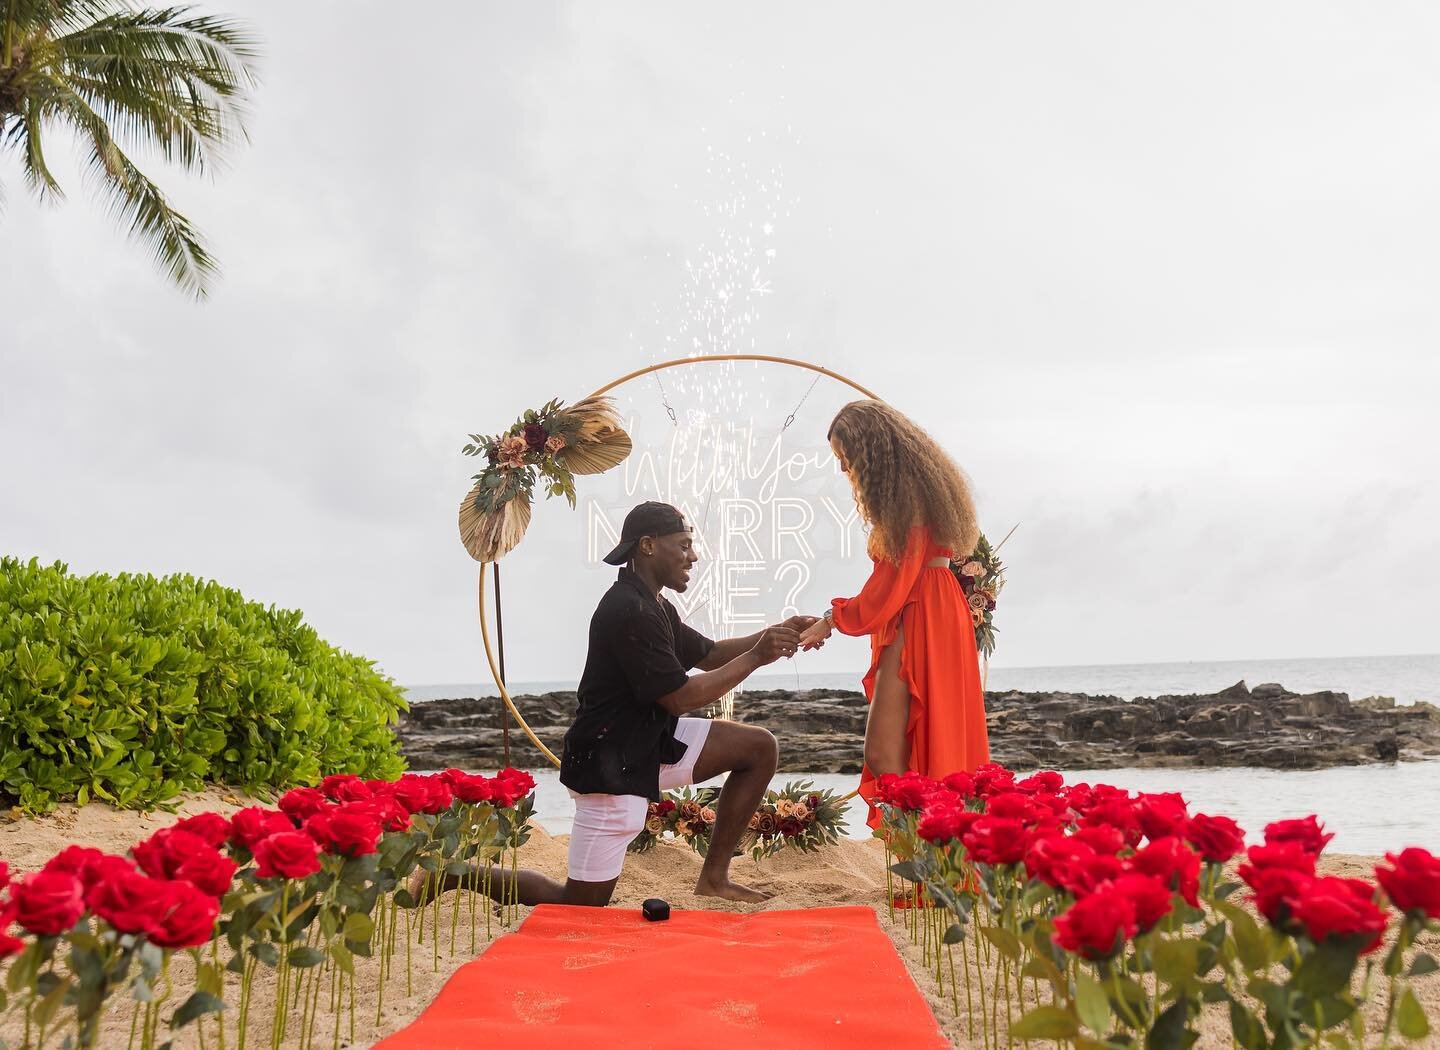 Congratulations to Stephen aka @rowdymascot and his new fianc&eacute; 🎉

Send us a message to learn more about our proposal services and packages 📲

#proposalinhawaii #engagedinhawaii #hawaiiproposalsign